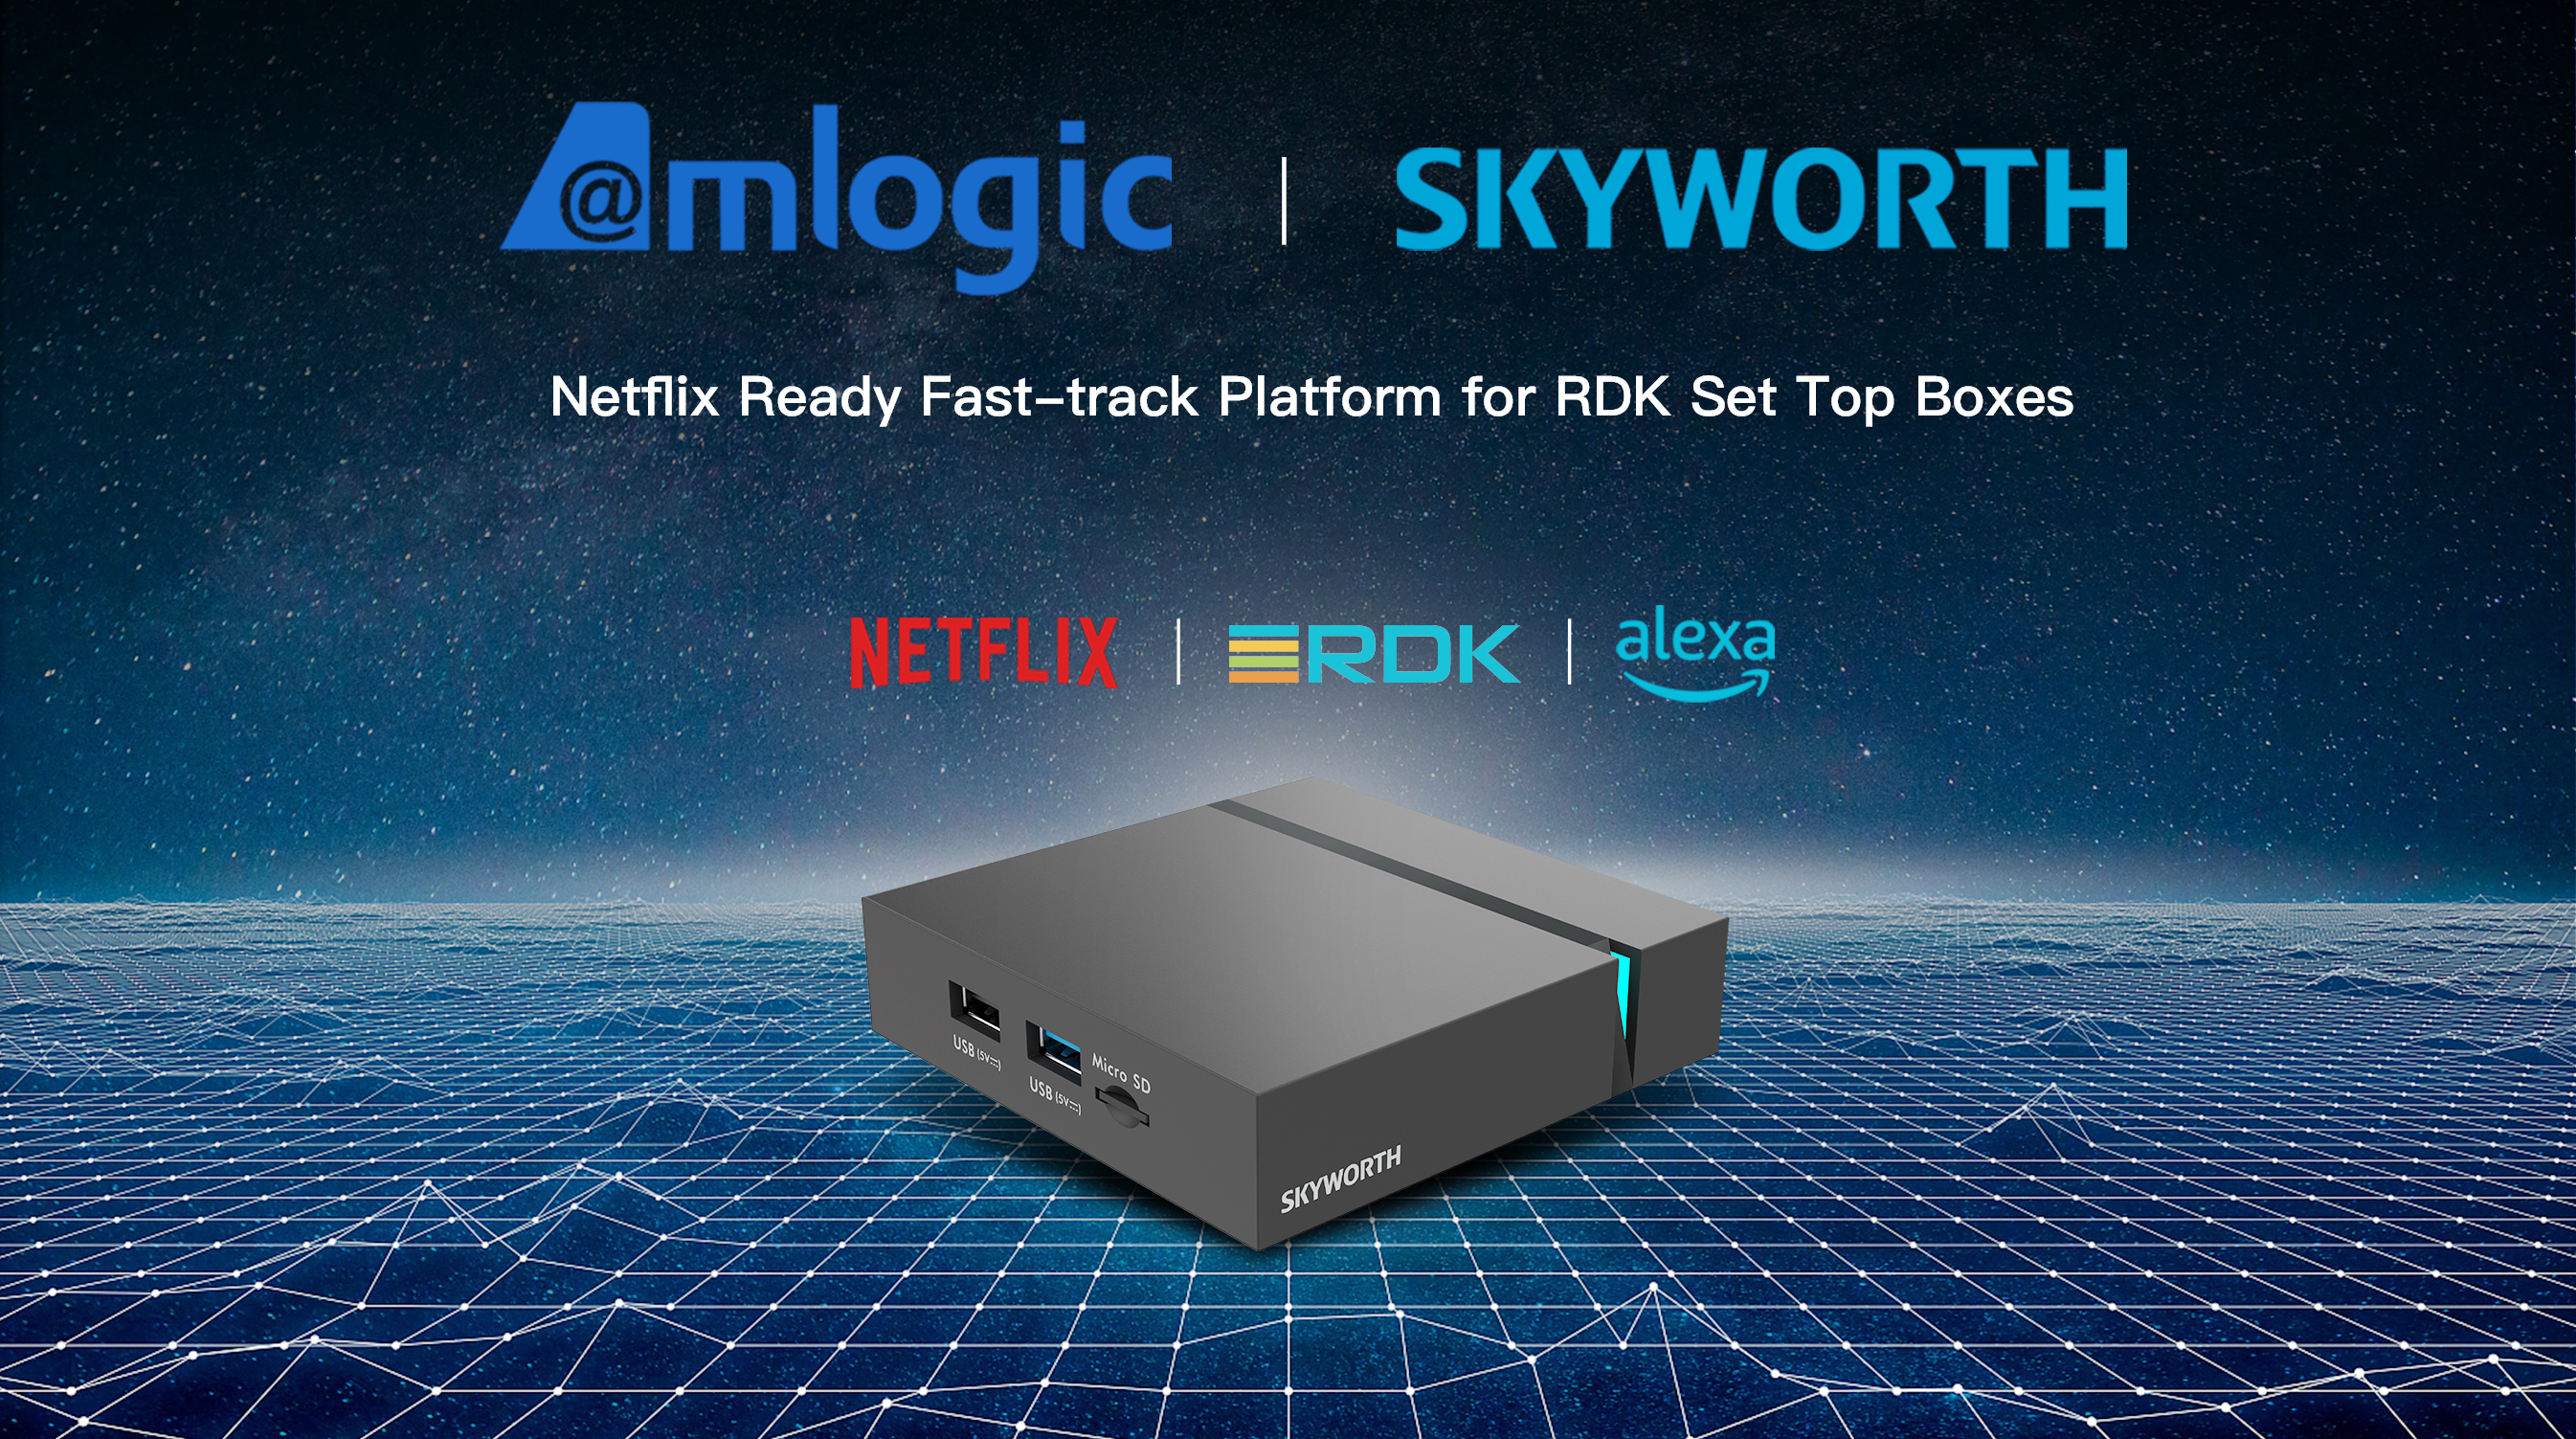 Amlogic and Skyworth Partner to Create Netflix Ready Fast-track Platform for Operator RDK Set Top Boxes